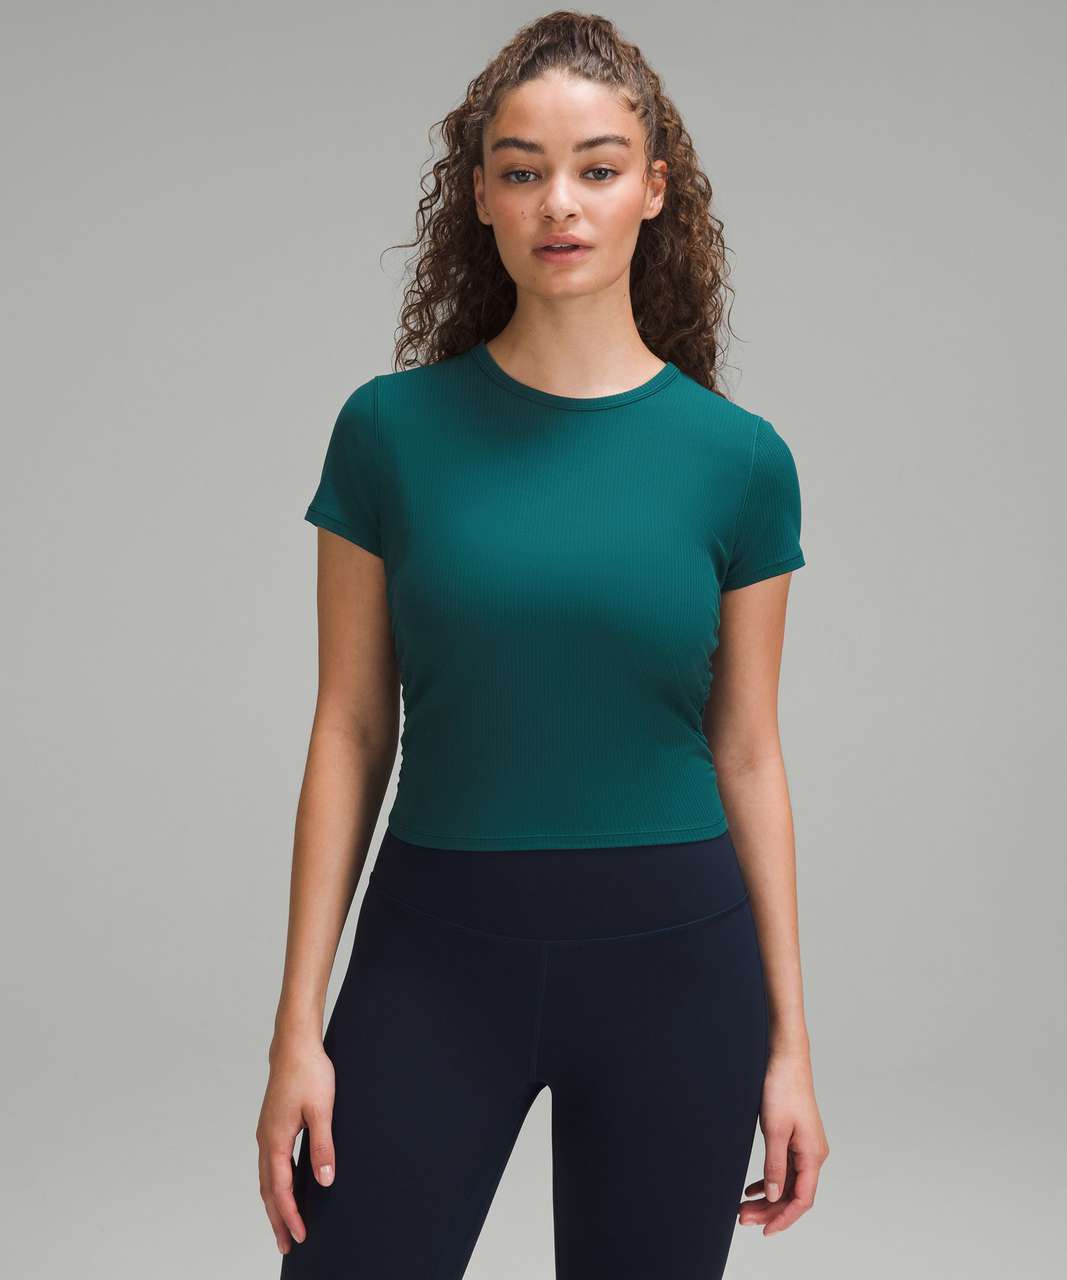 Lululemon All It Takes Ribbed Nulu T-Shirt - Storm Teal